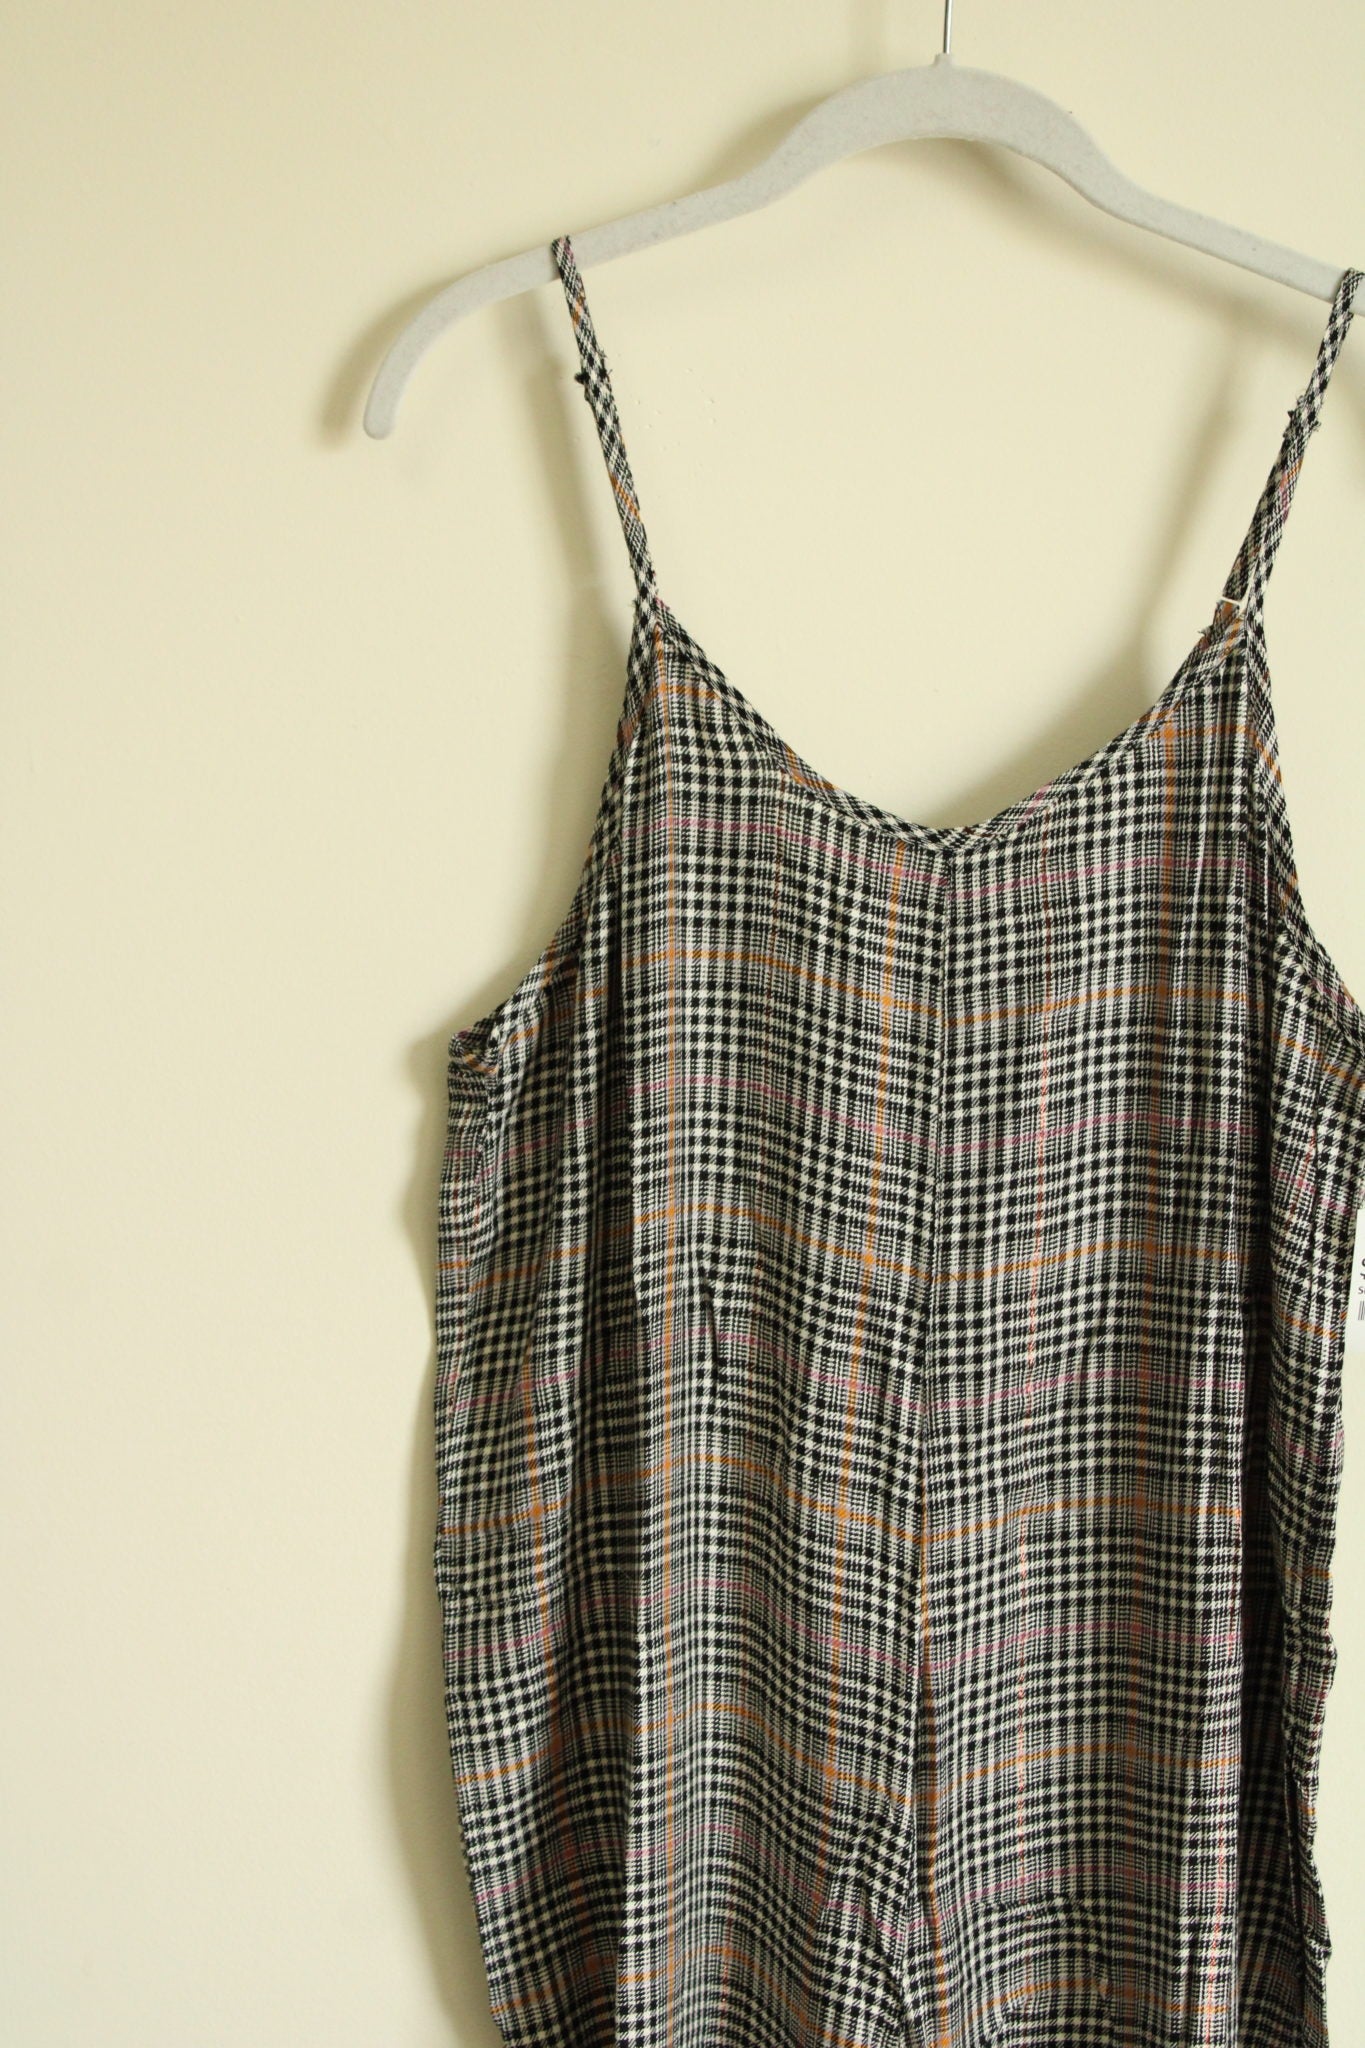 NEW Sandy & Sid Hounds Tooth Jumpsuit | Size L